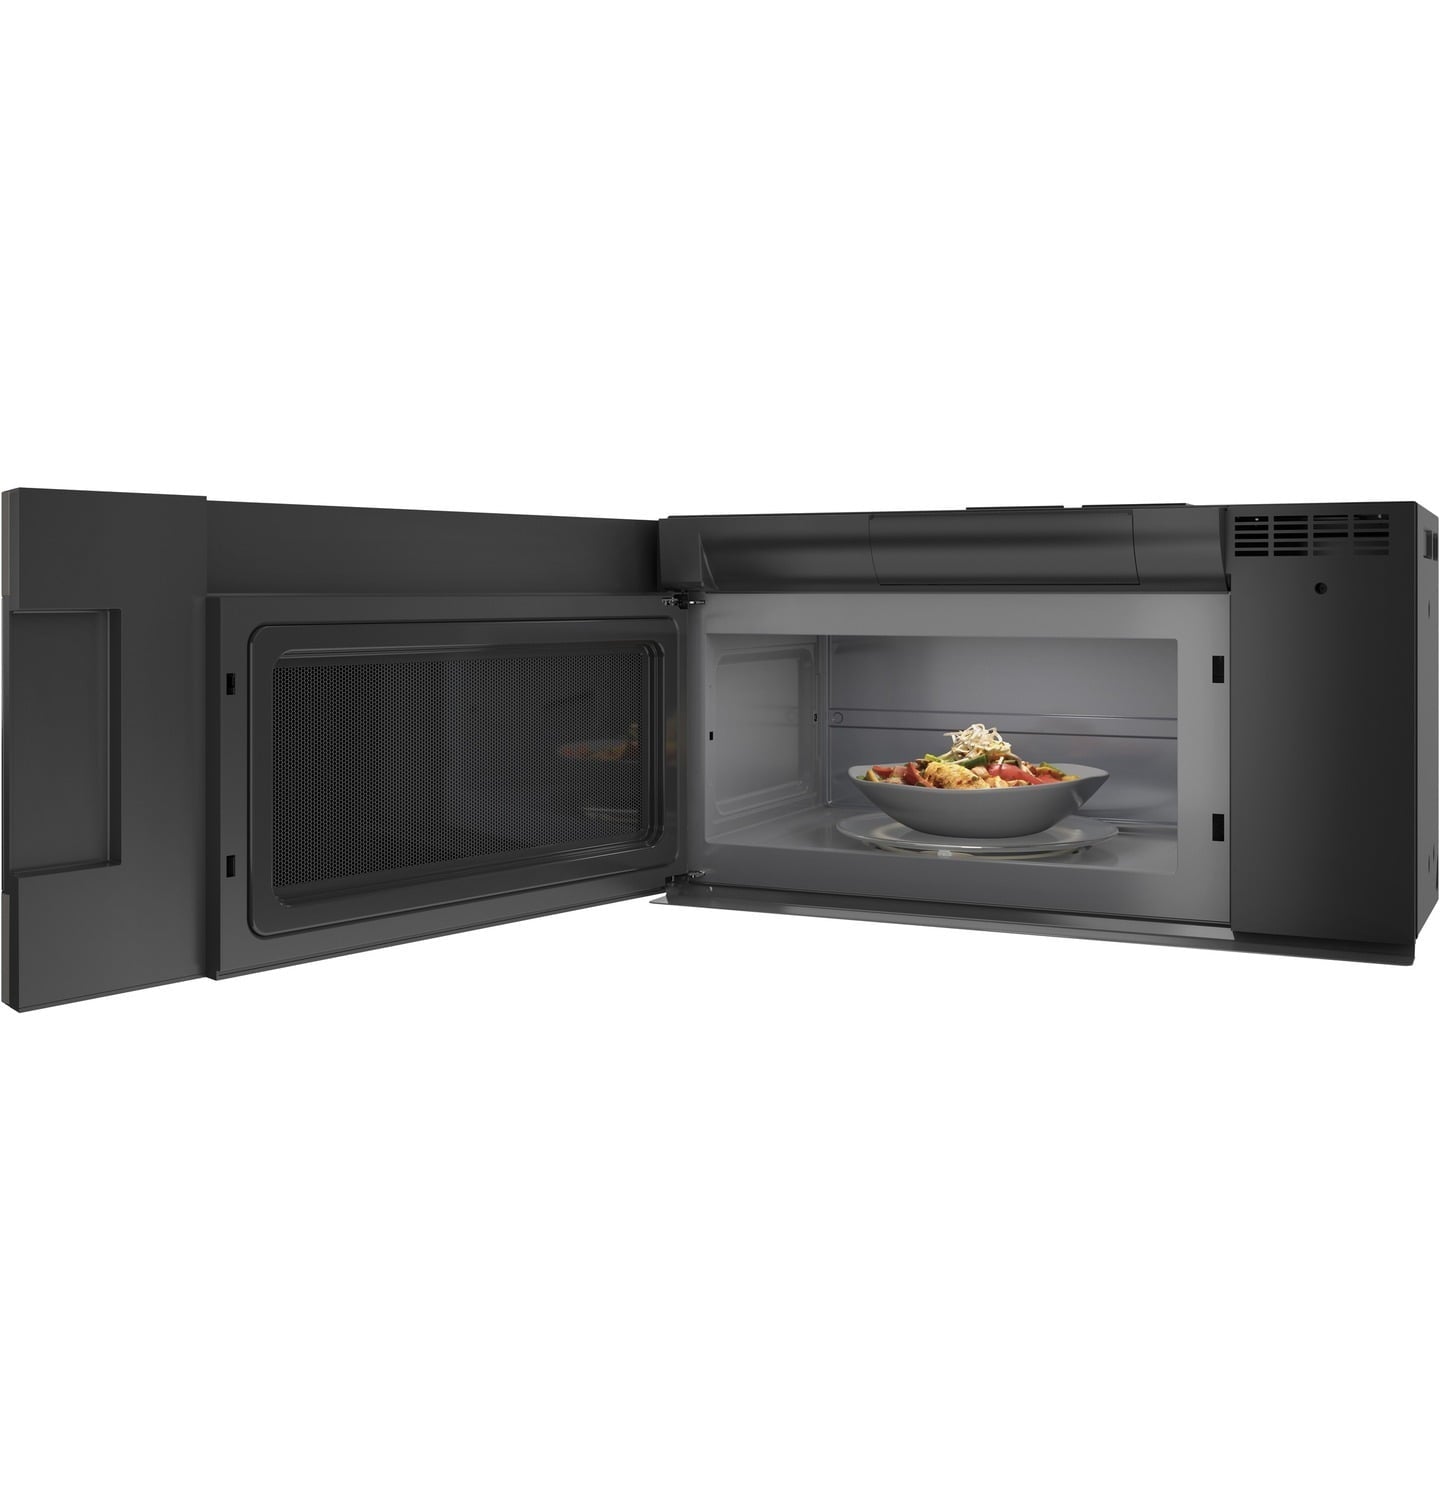 Haier QVM7167BNTS 30" 1.6 Cu. Ft. Smart Over-The-Range Microwave Oven